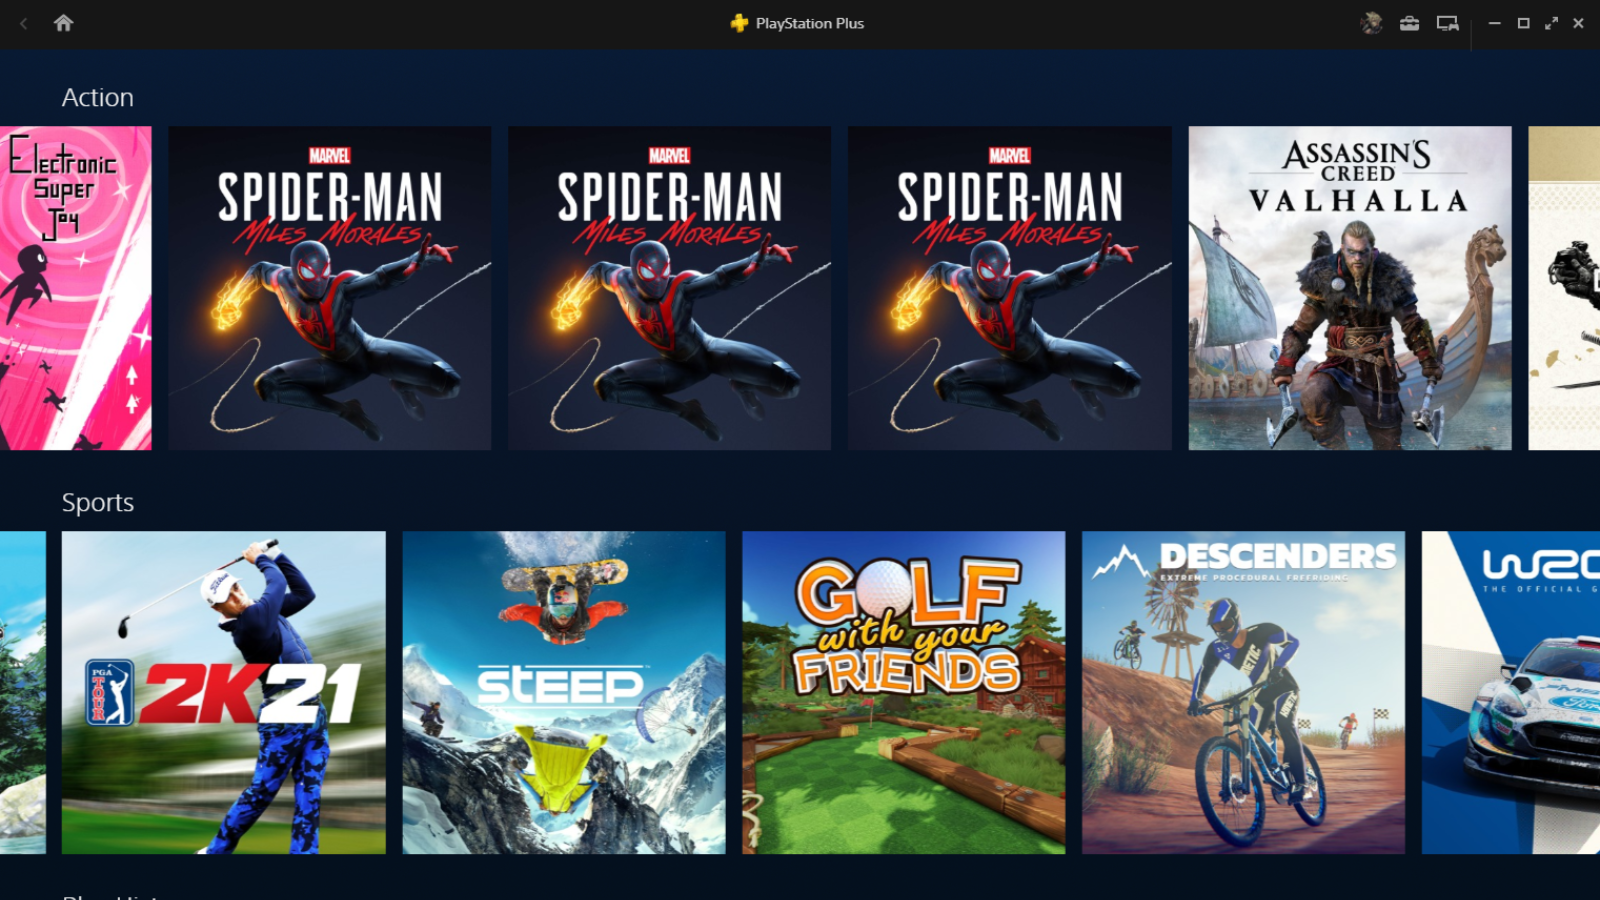 Will The New PlayStation Plus Come To PC?